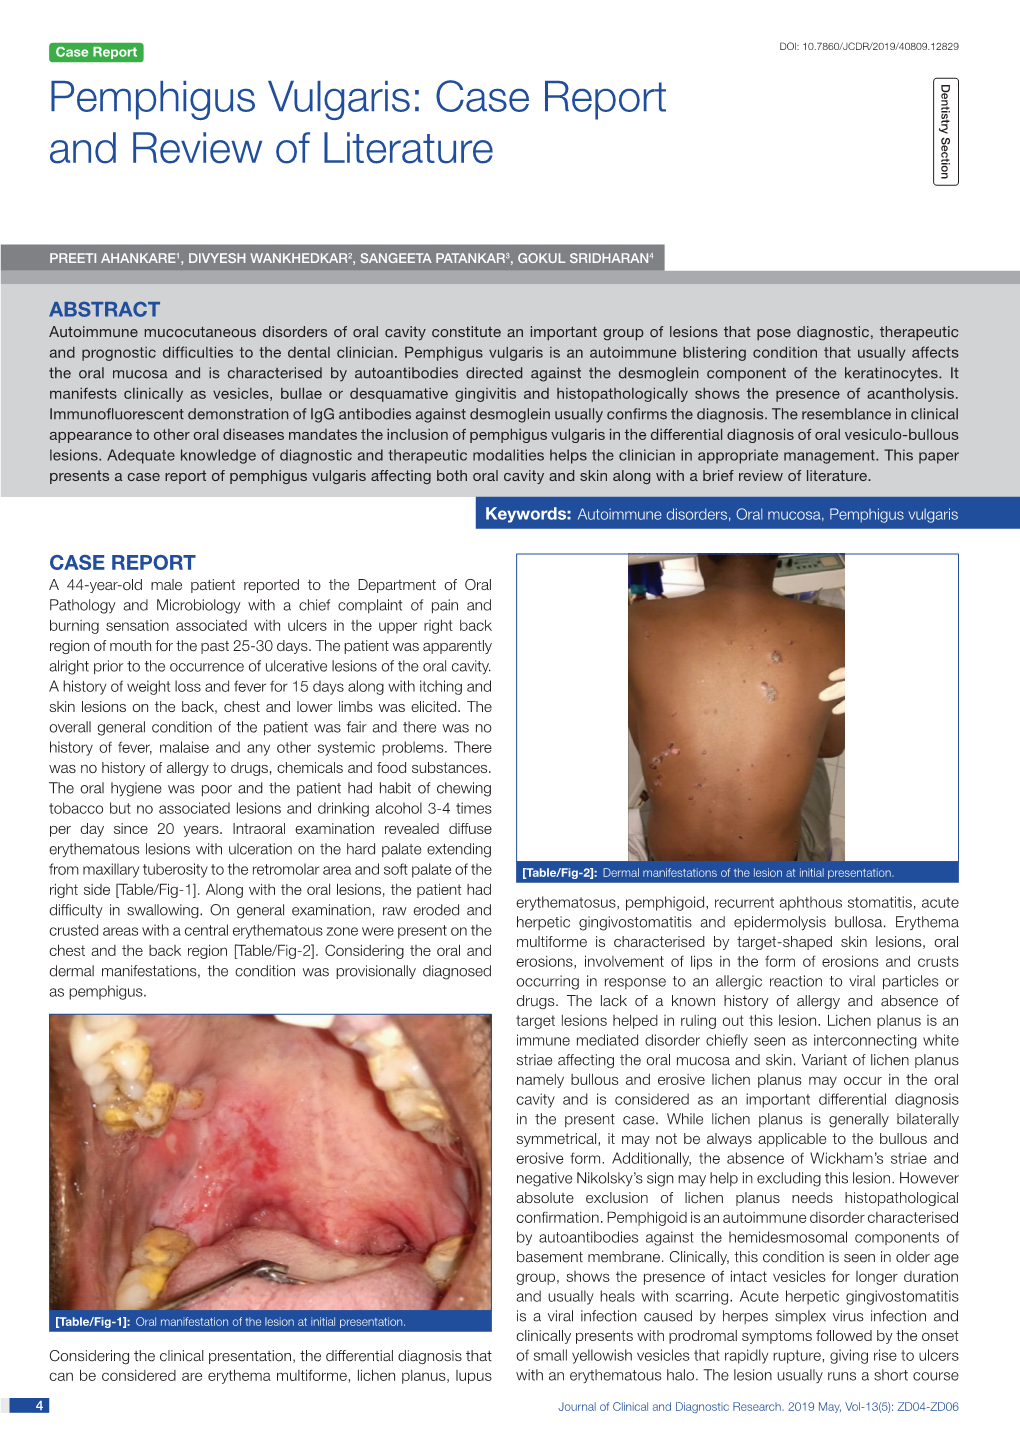 Pemphigus Vulgaris: Case Report Dentistry Section and Review of Literature